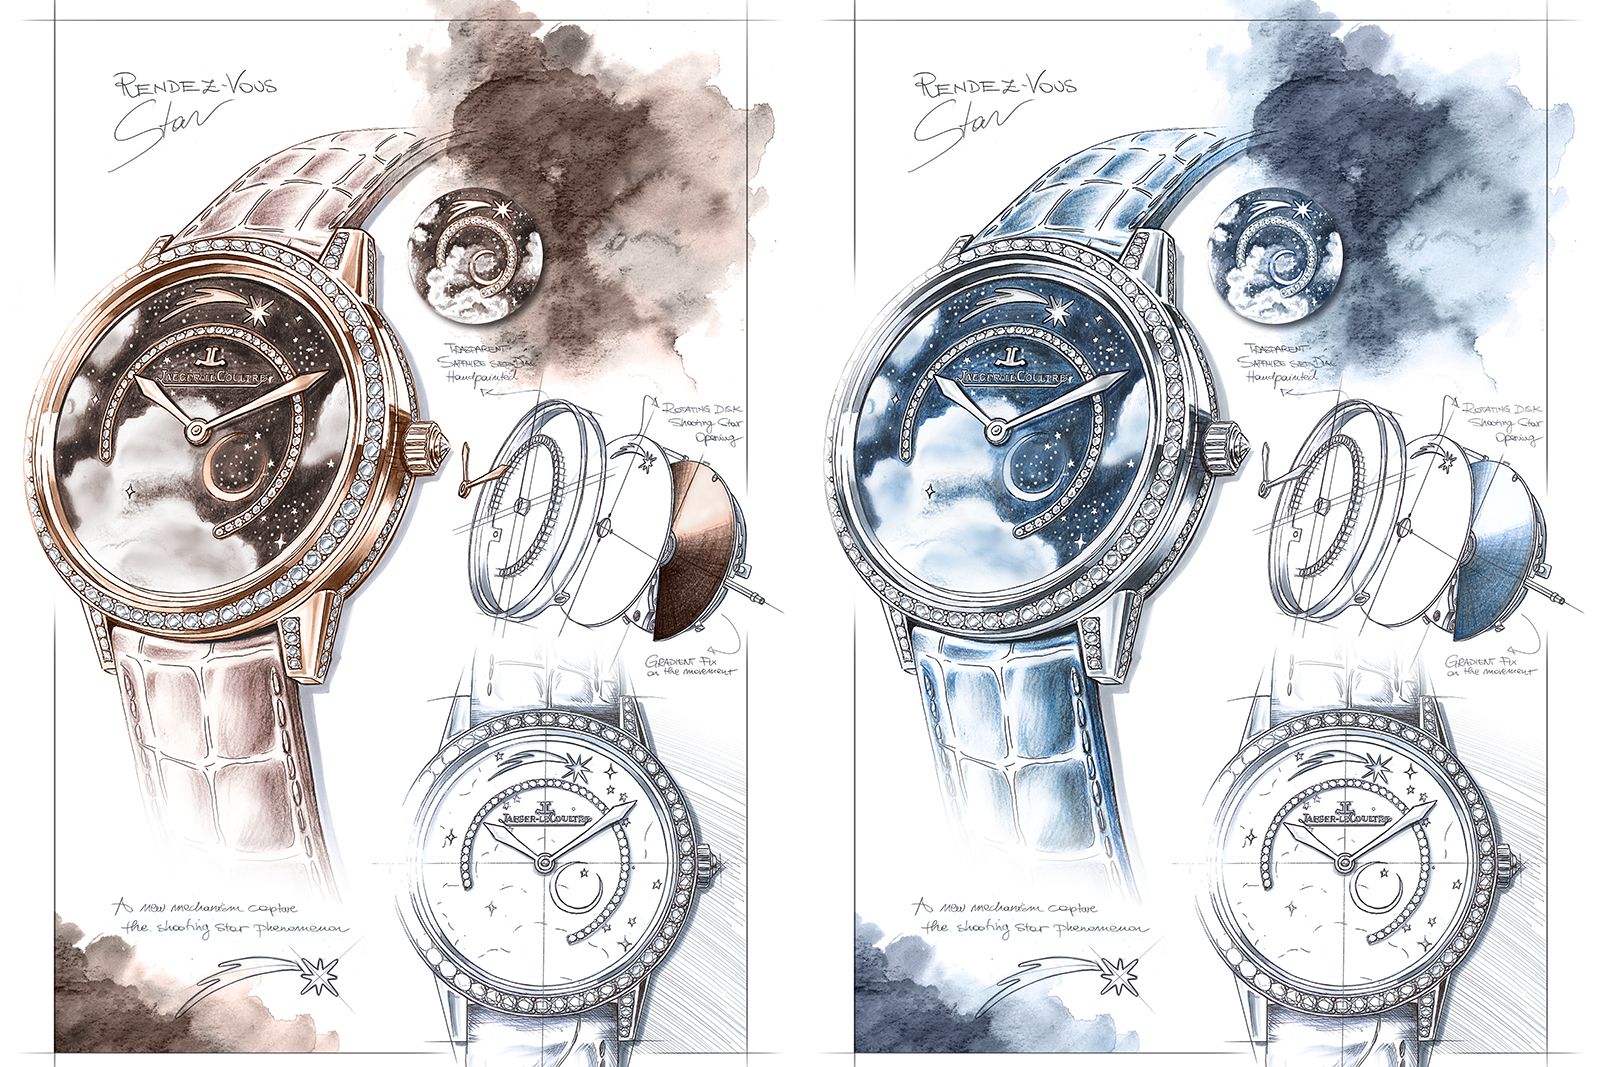 The two variations of the Jaeger-LeCoultre Rendez-Vous Star watch with a hand-painted moon, stars and night sky